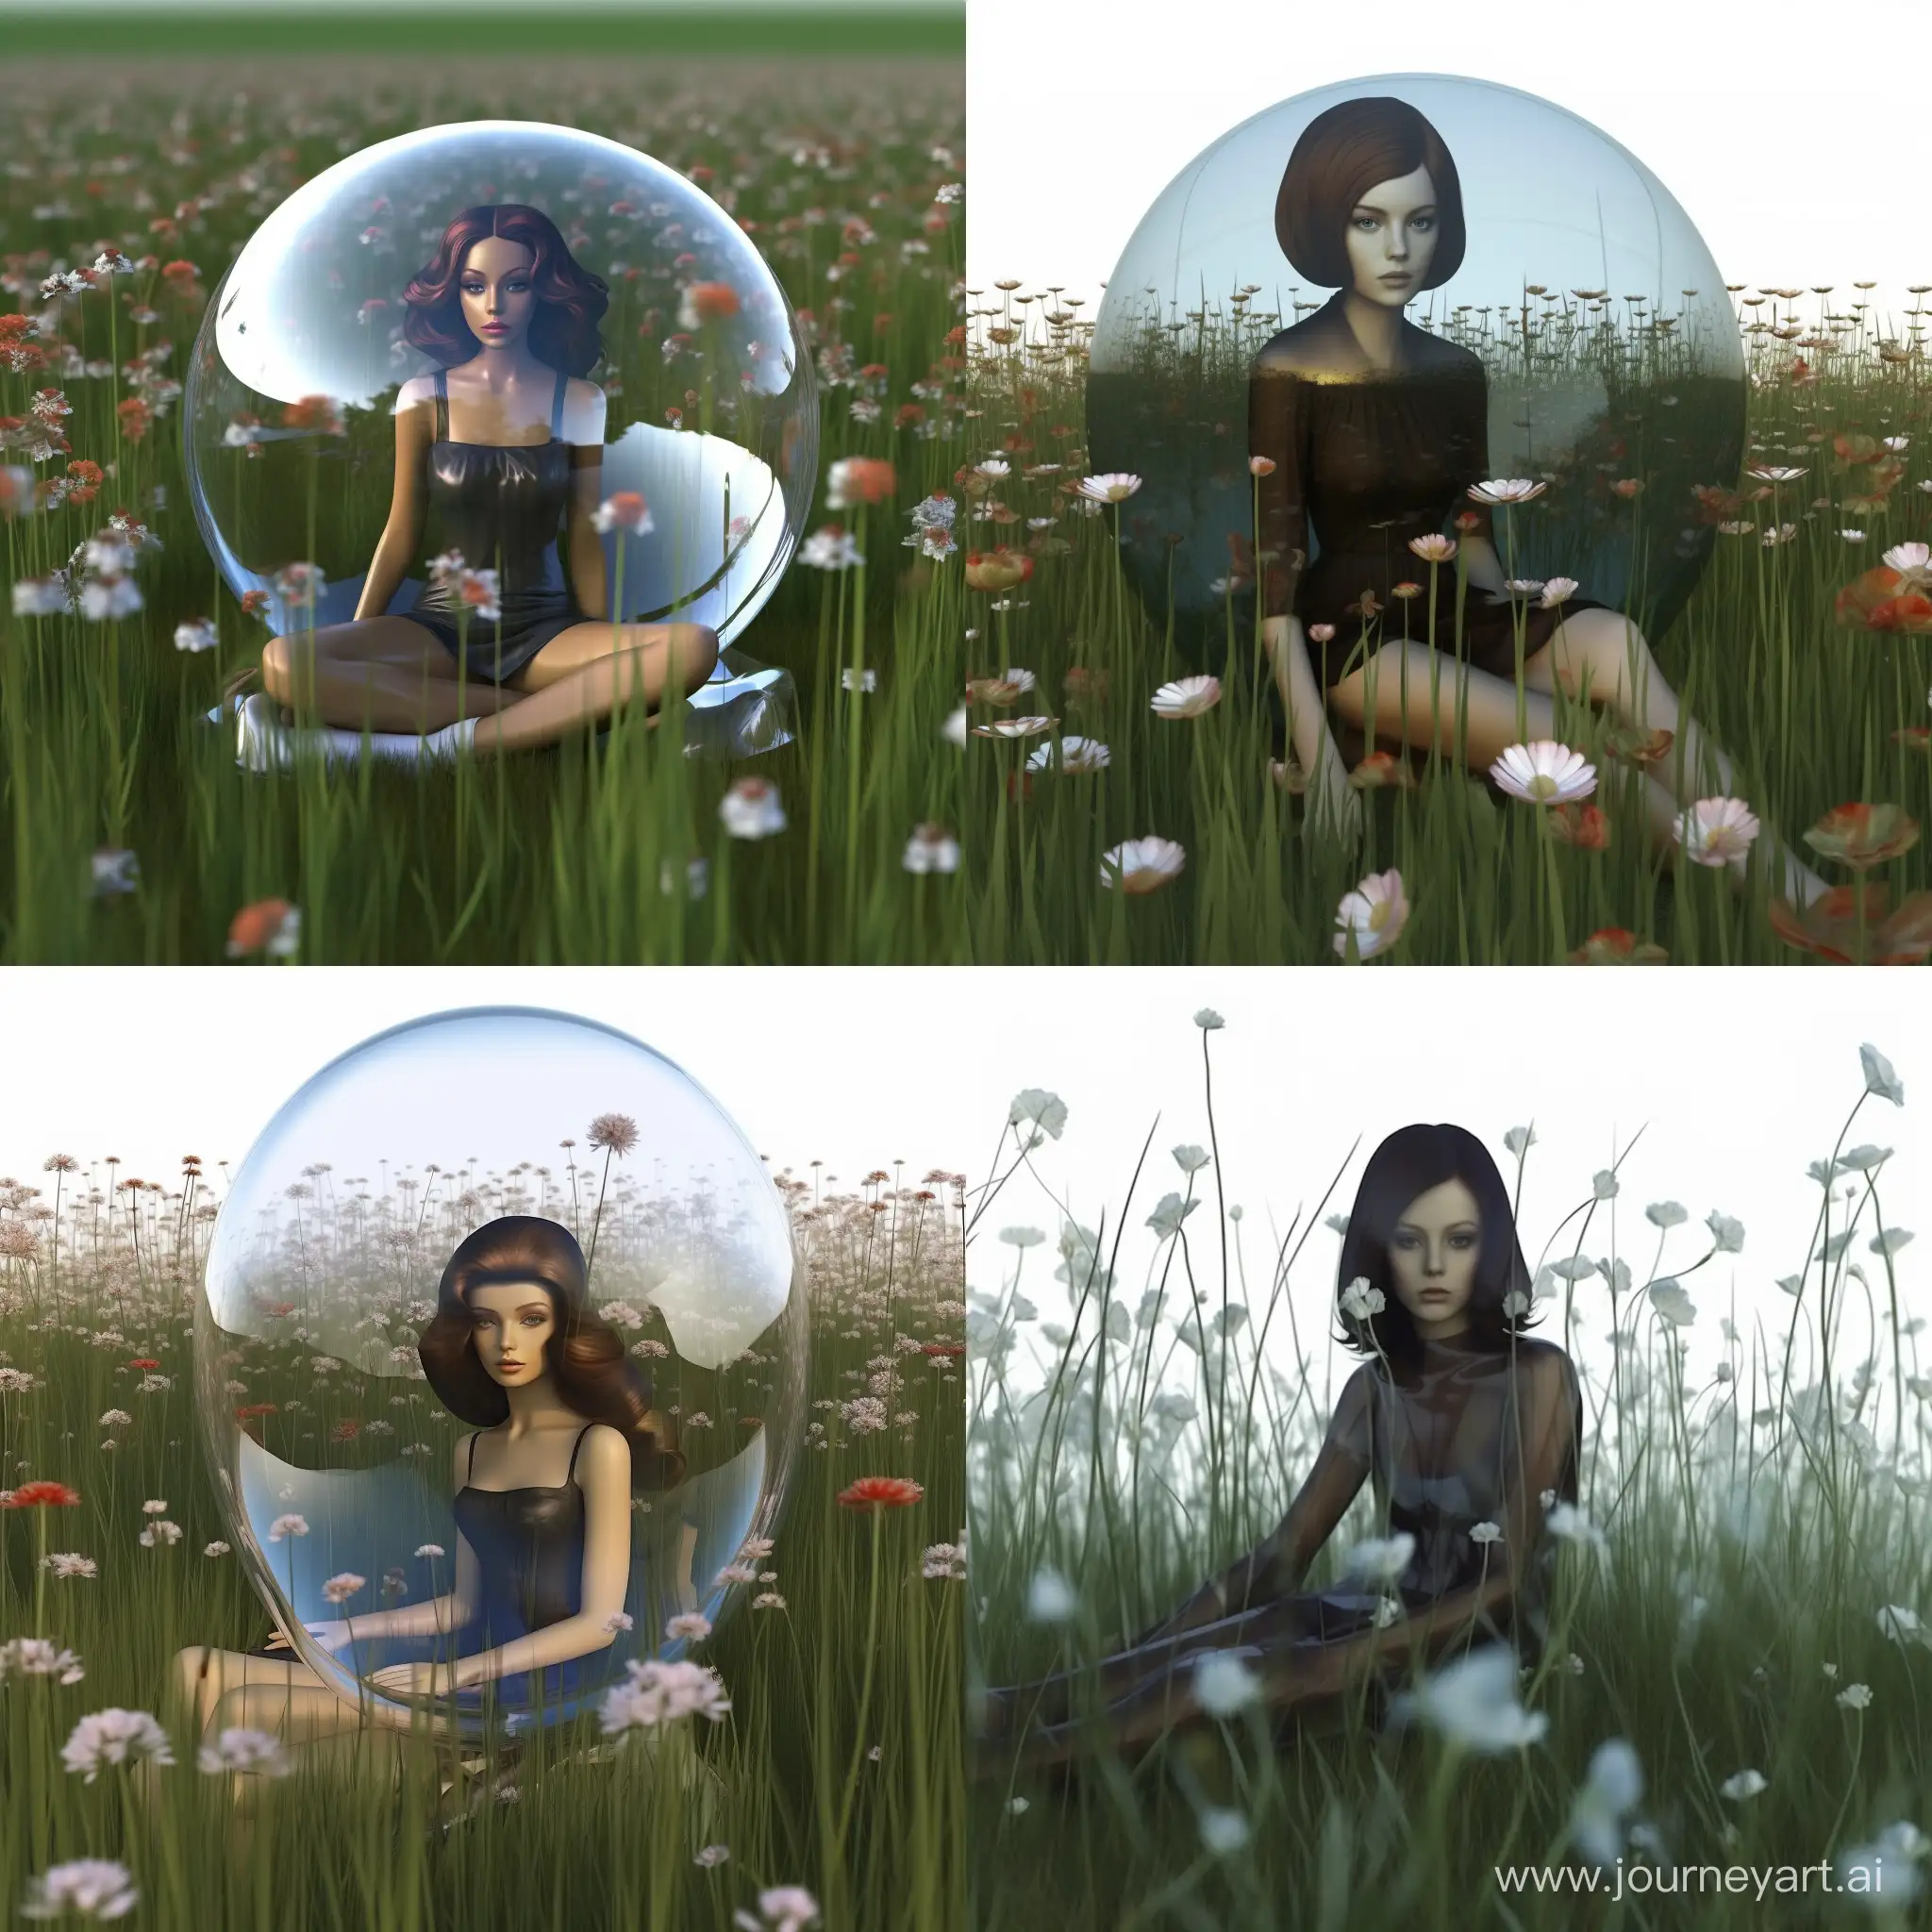 A beautyful woman sitting in the grass with tranparent glass body,3d render, 4k Flowers in the body.

Try it